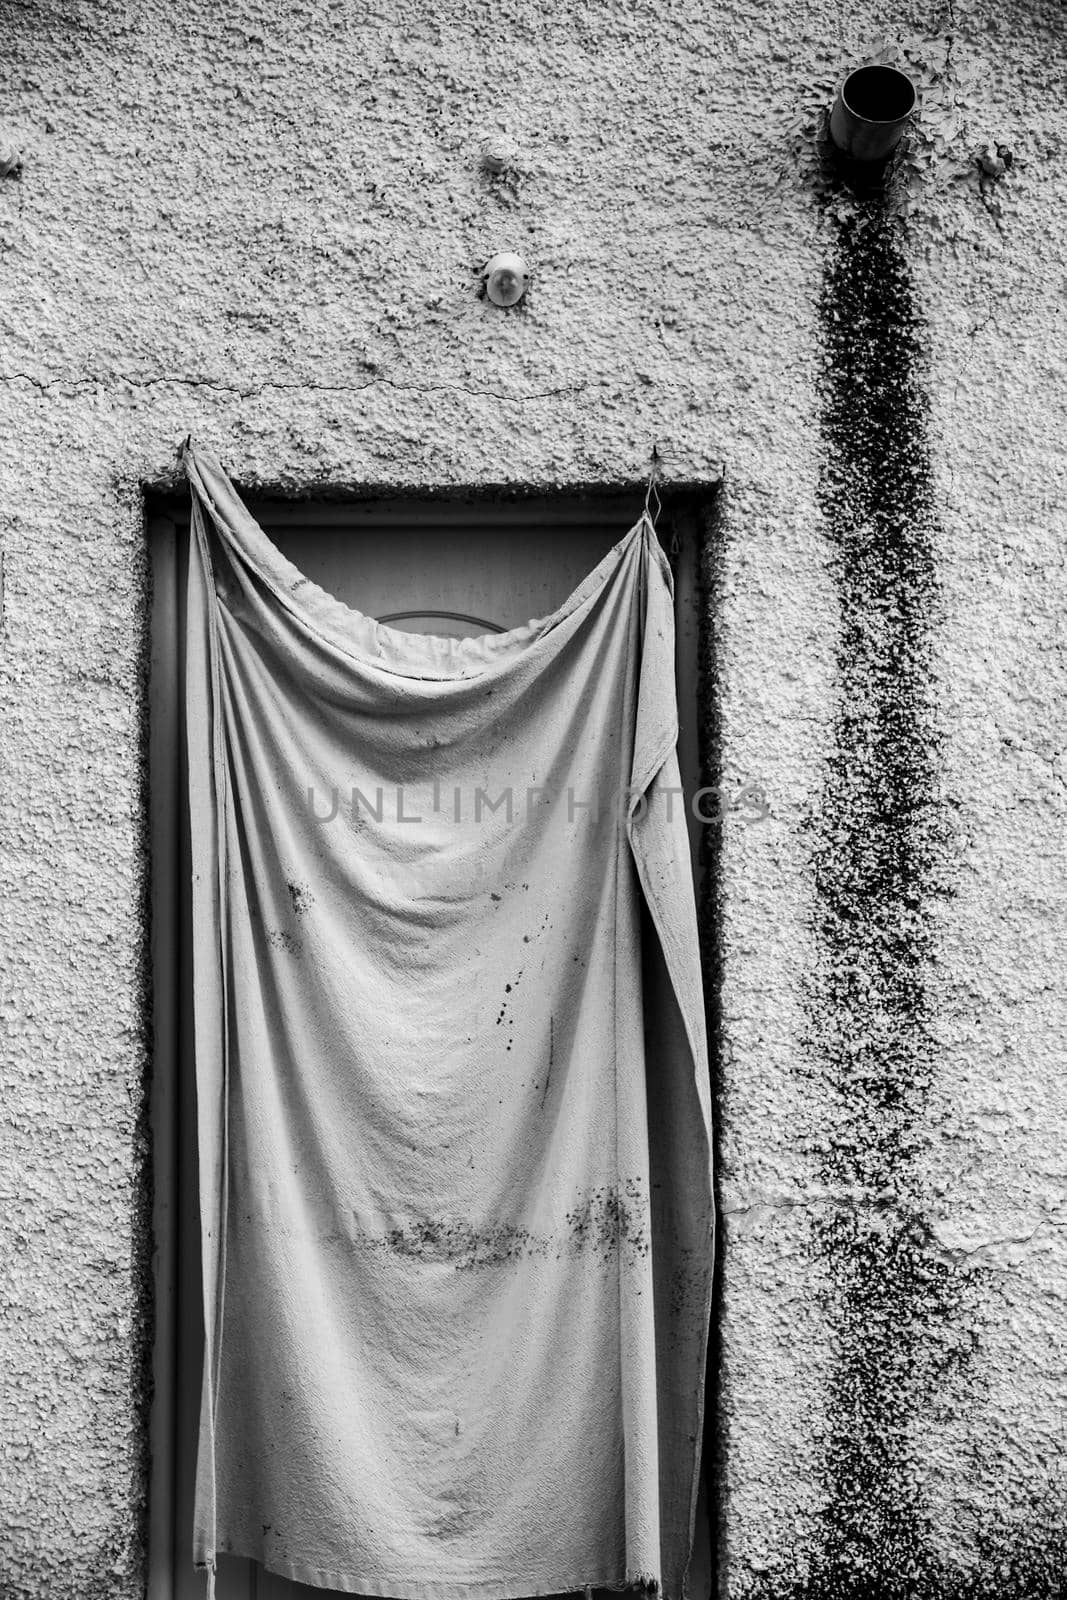 Facade in Spain with door protected by old cloth. Monochrome picture.